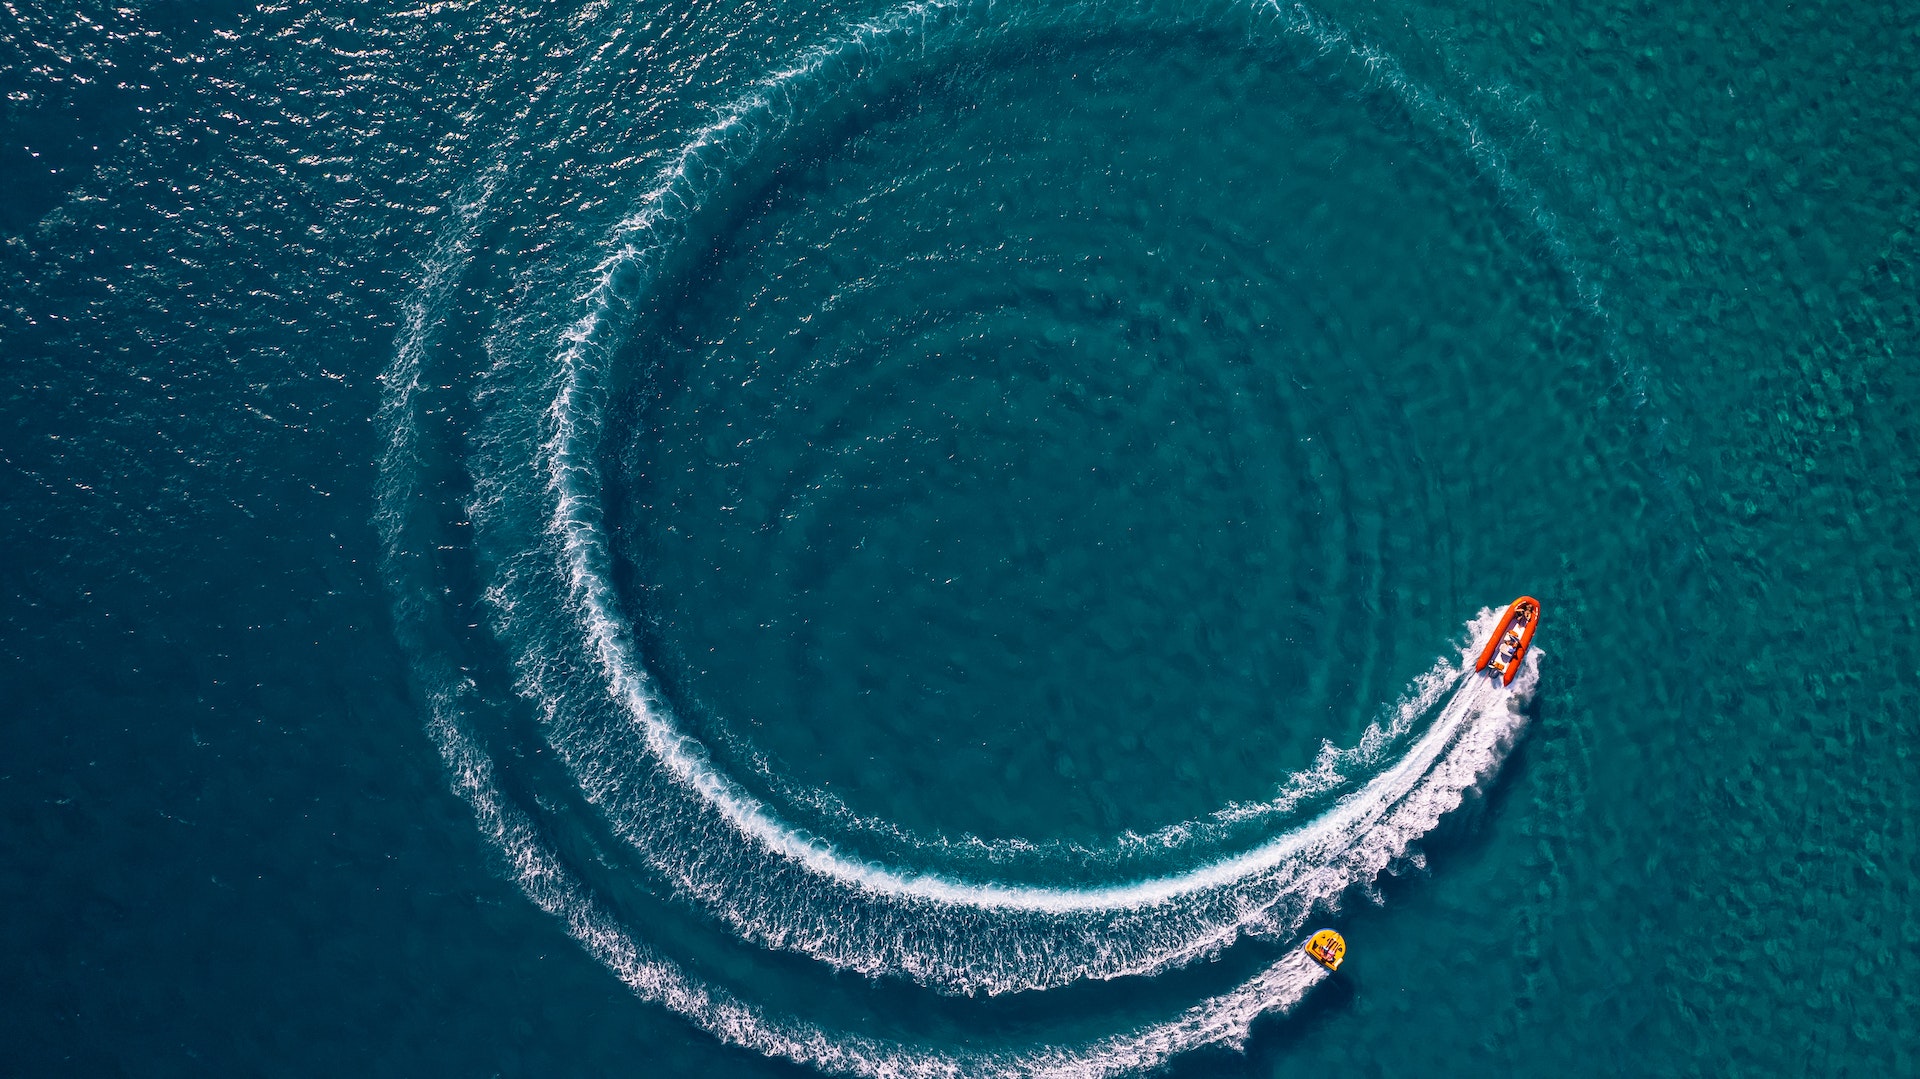 Jet-ski seen from above